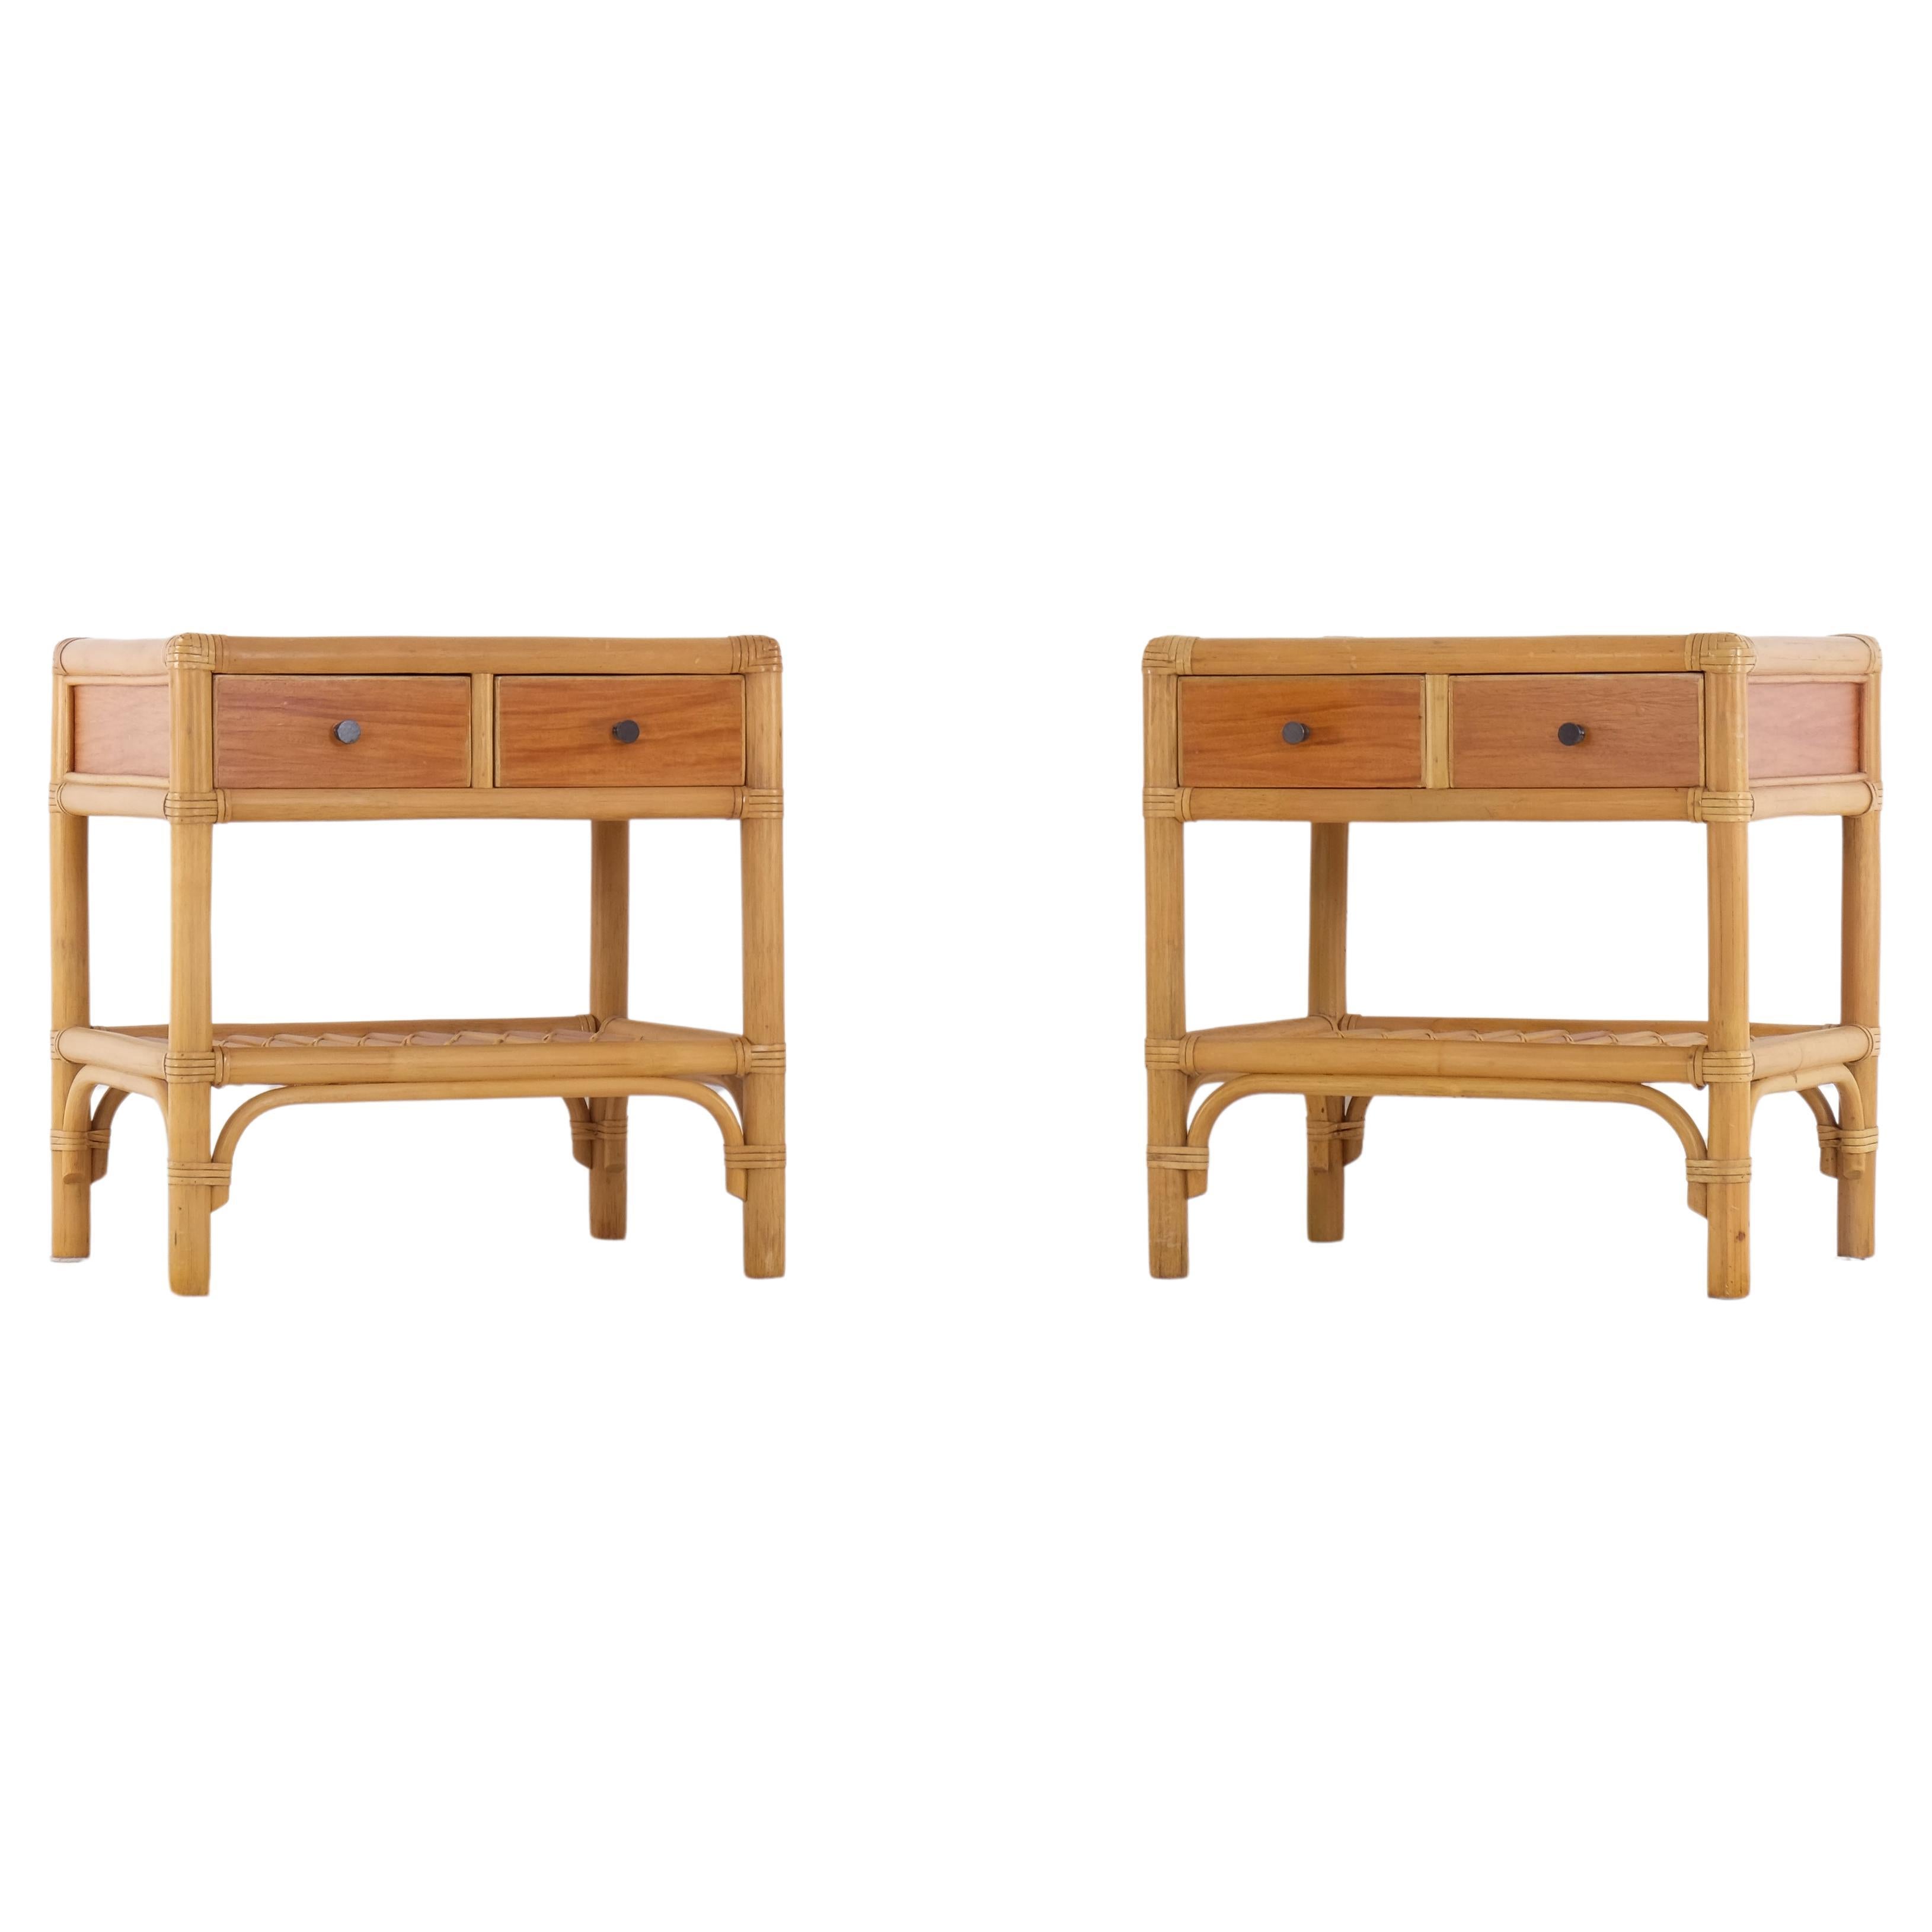 Pair of bedside tables by DUX, Sweden, 1970s For Sale